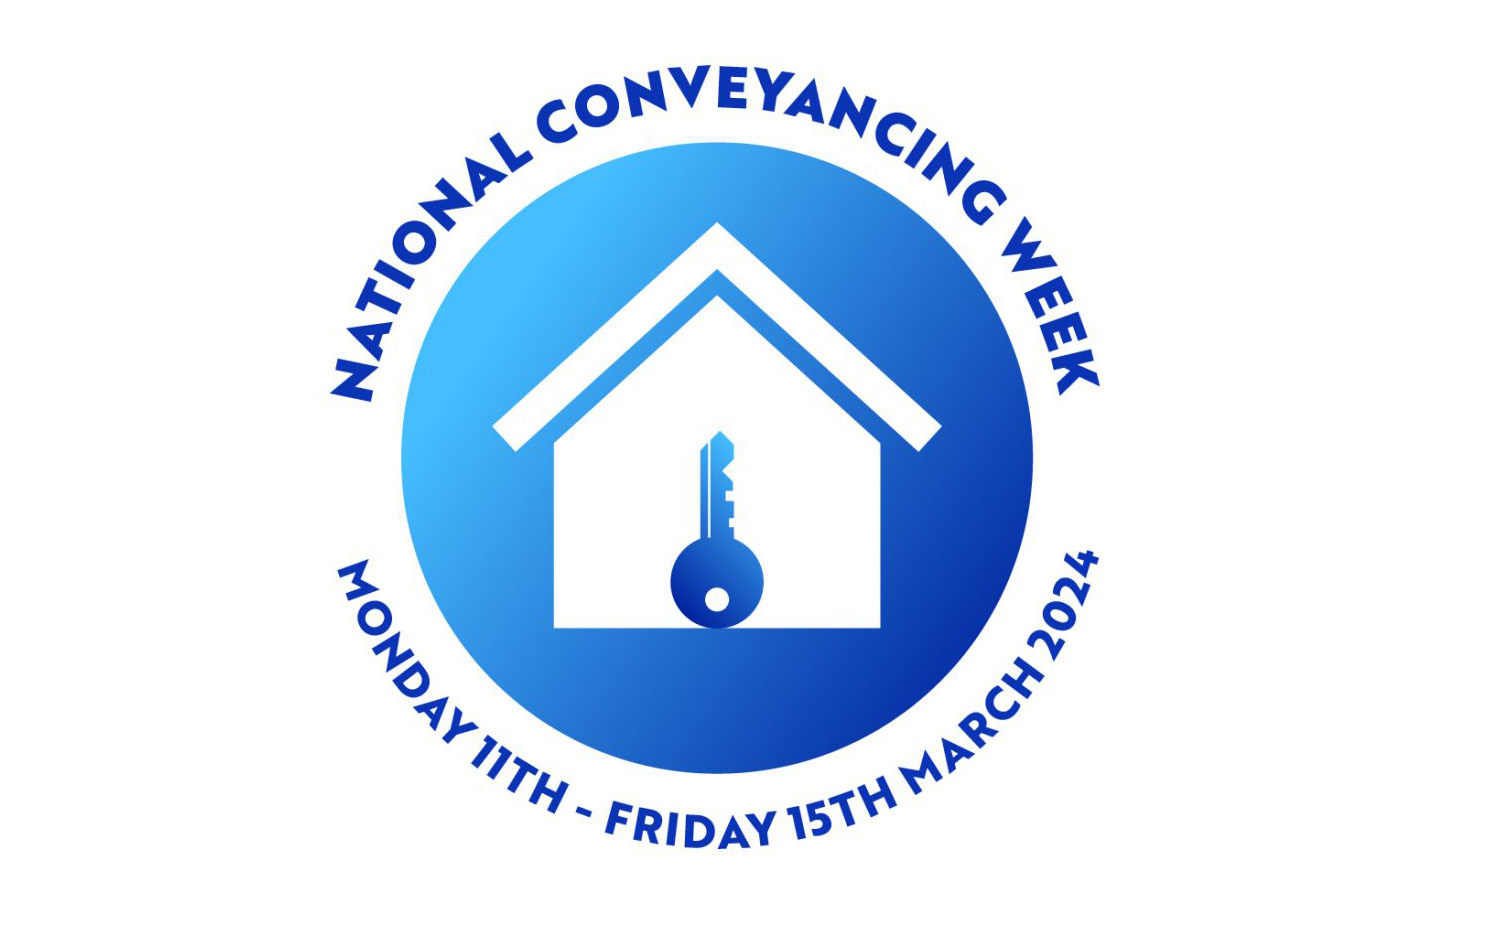 Three out of four conveyancing clients satisfied with service and would use the same firm again